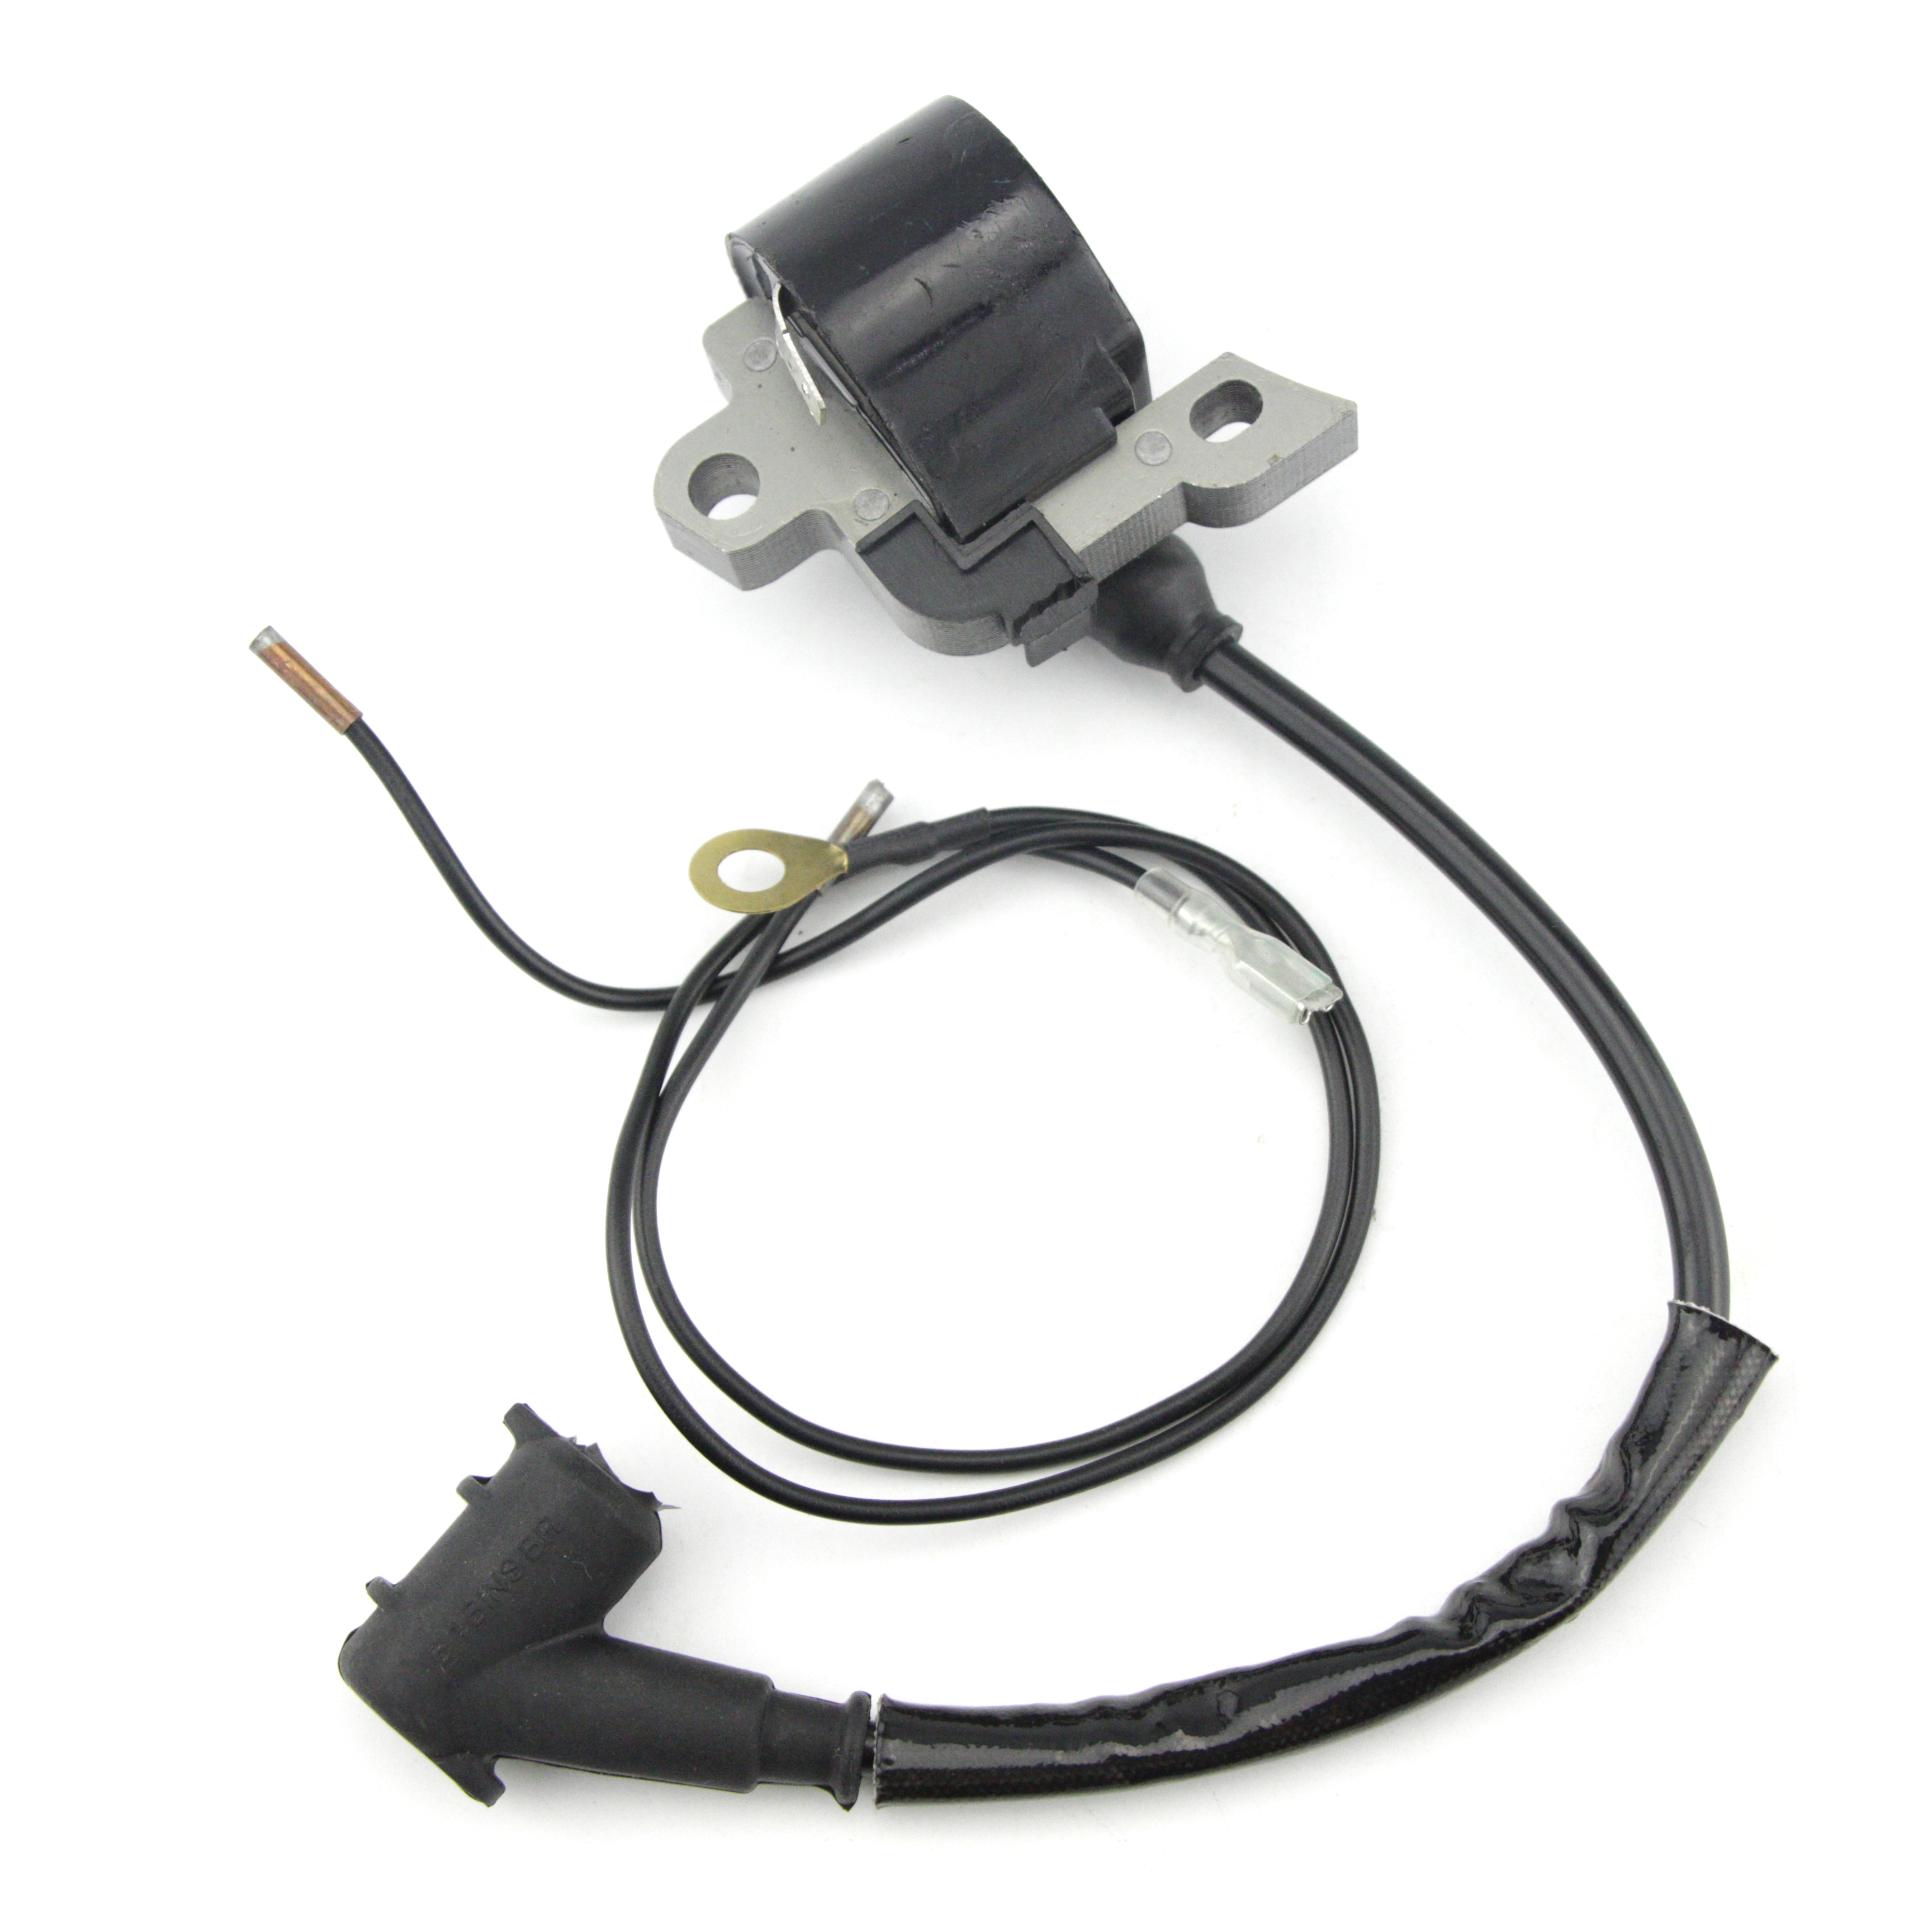 Ignition Coil For Stihl MS240 MS260 MS290 MS310 MS360 MS390 MS440 Chainsaw Parts